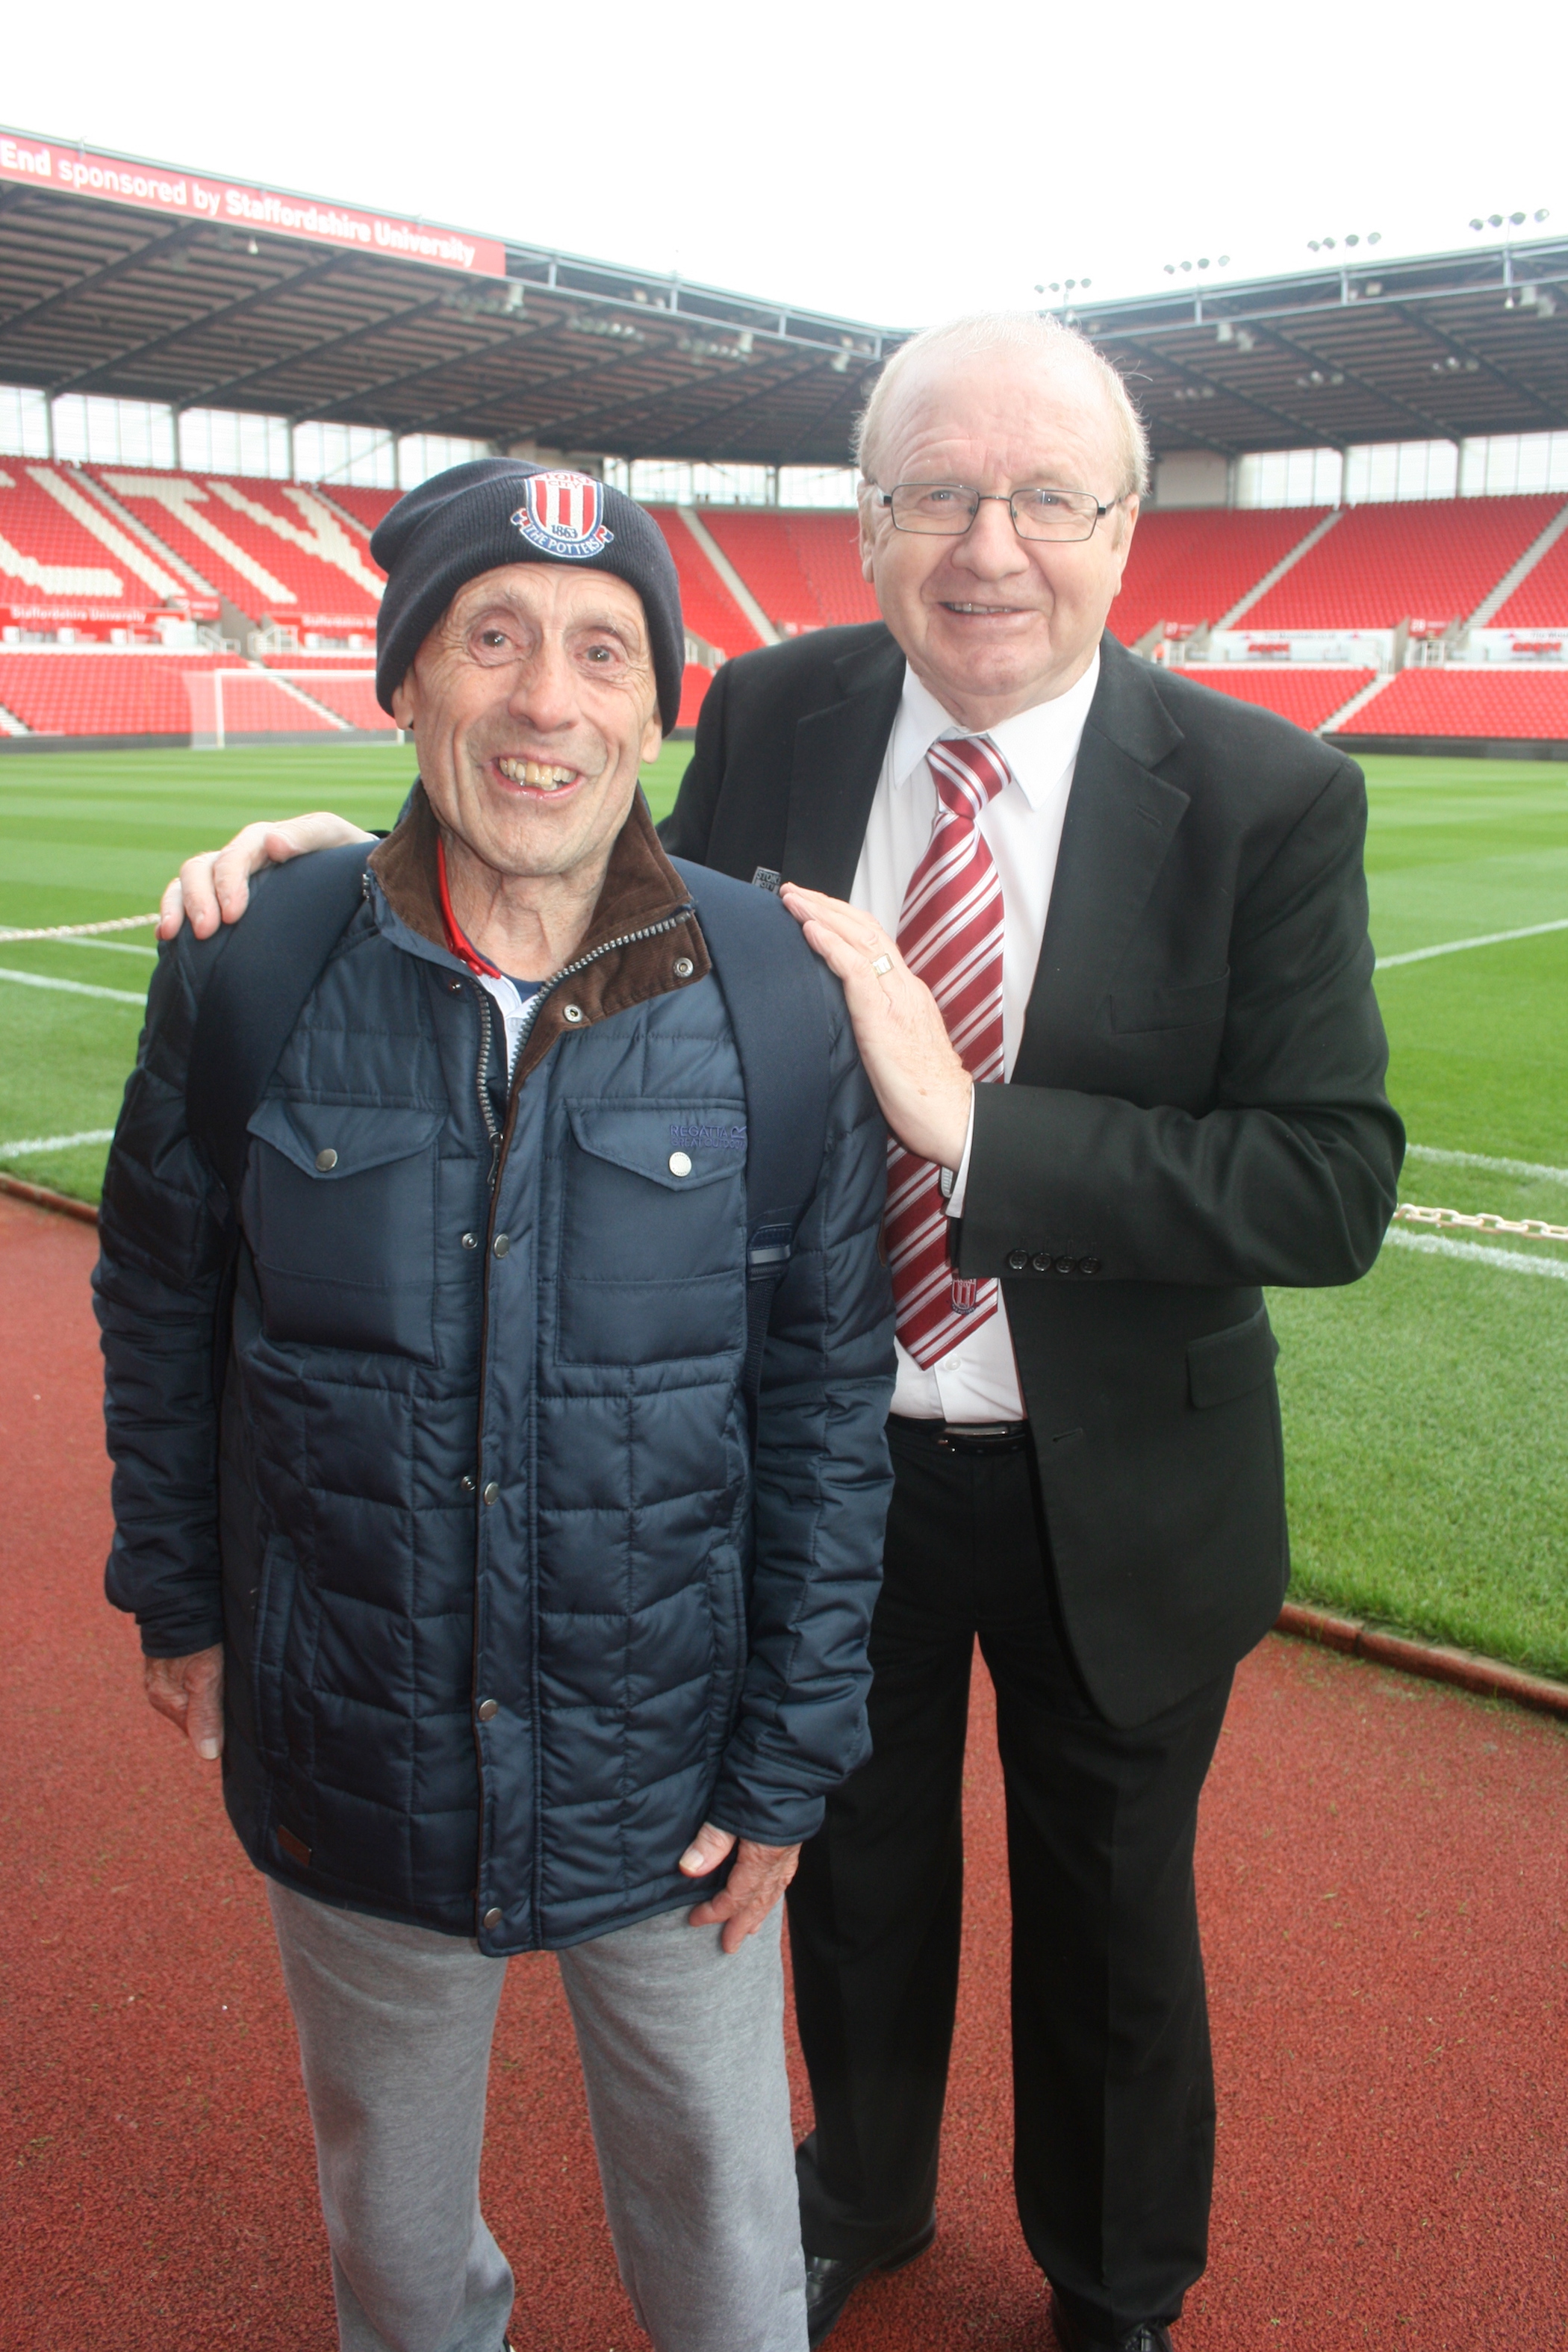 Belong Newcastle-under-Lyme resident Brian Tansley and Terry Conroy, Stoke City legend from the 1970s.